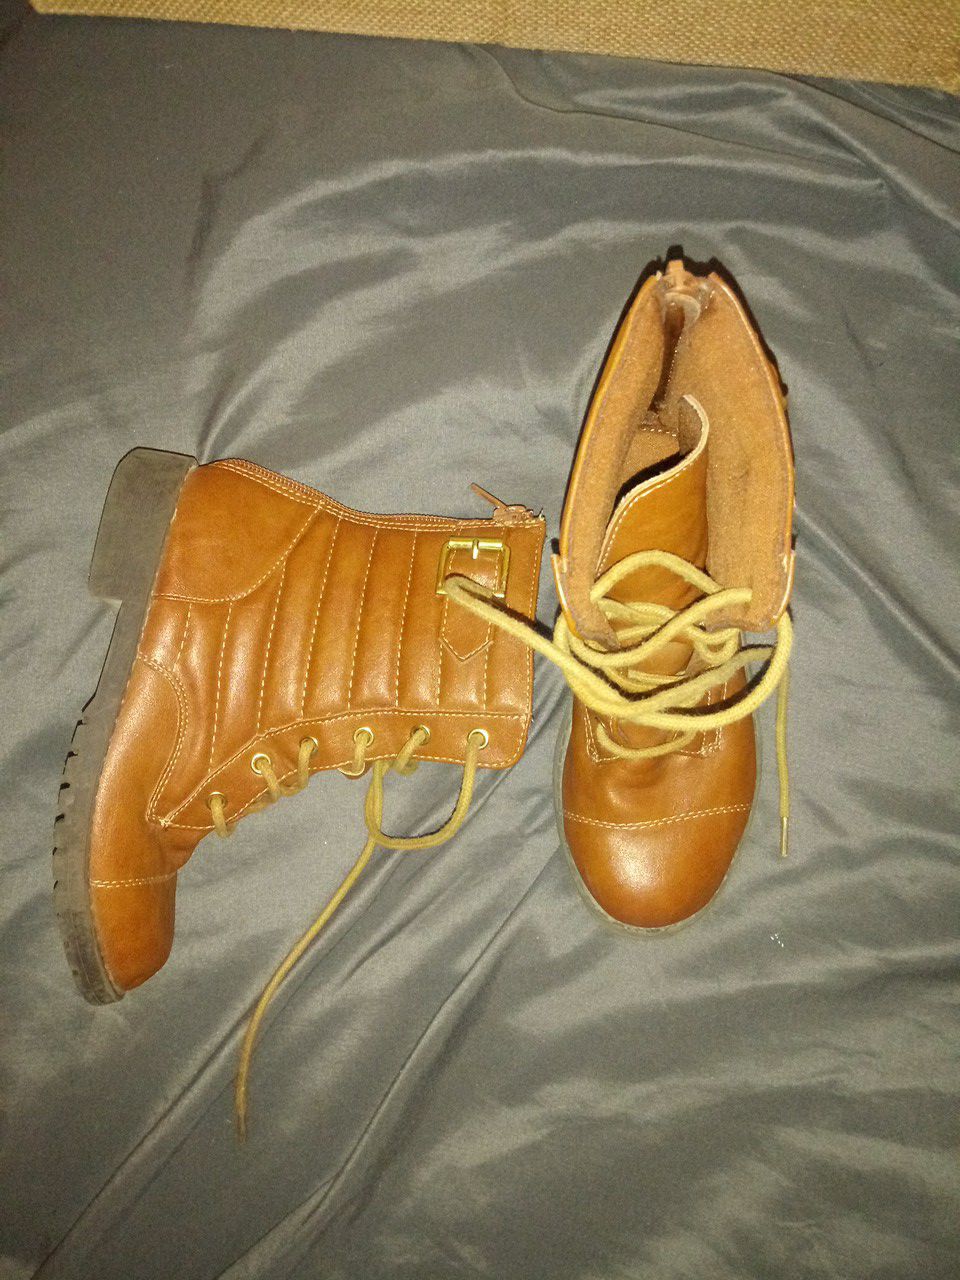 Self steem toddler boots size 12